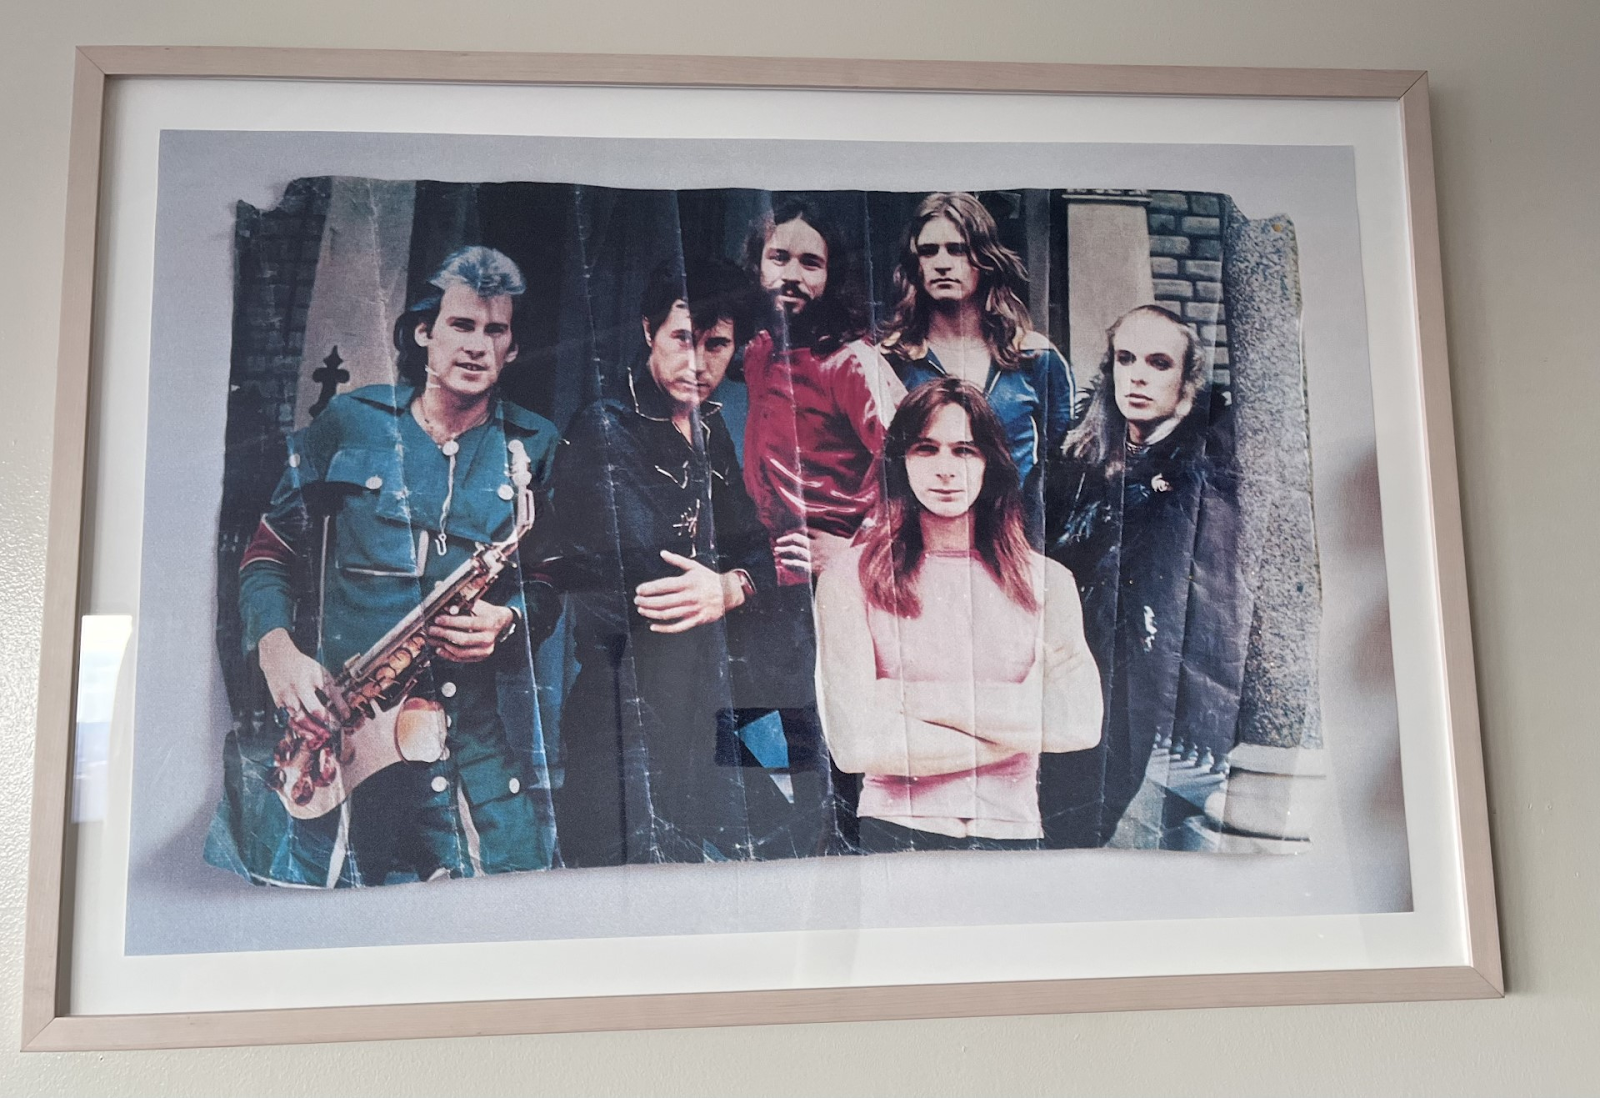 The framed art piece, which features a photo print of a vintage photo print that has been crinkled and folded, but is now stretched out for the viewer to see. Six band members pose, facing the camera, some smiling and others staring down the photographer.